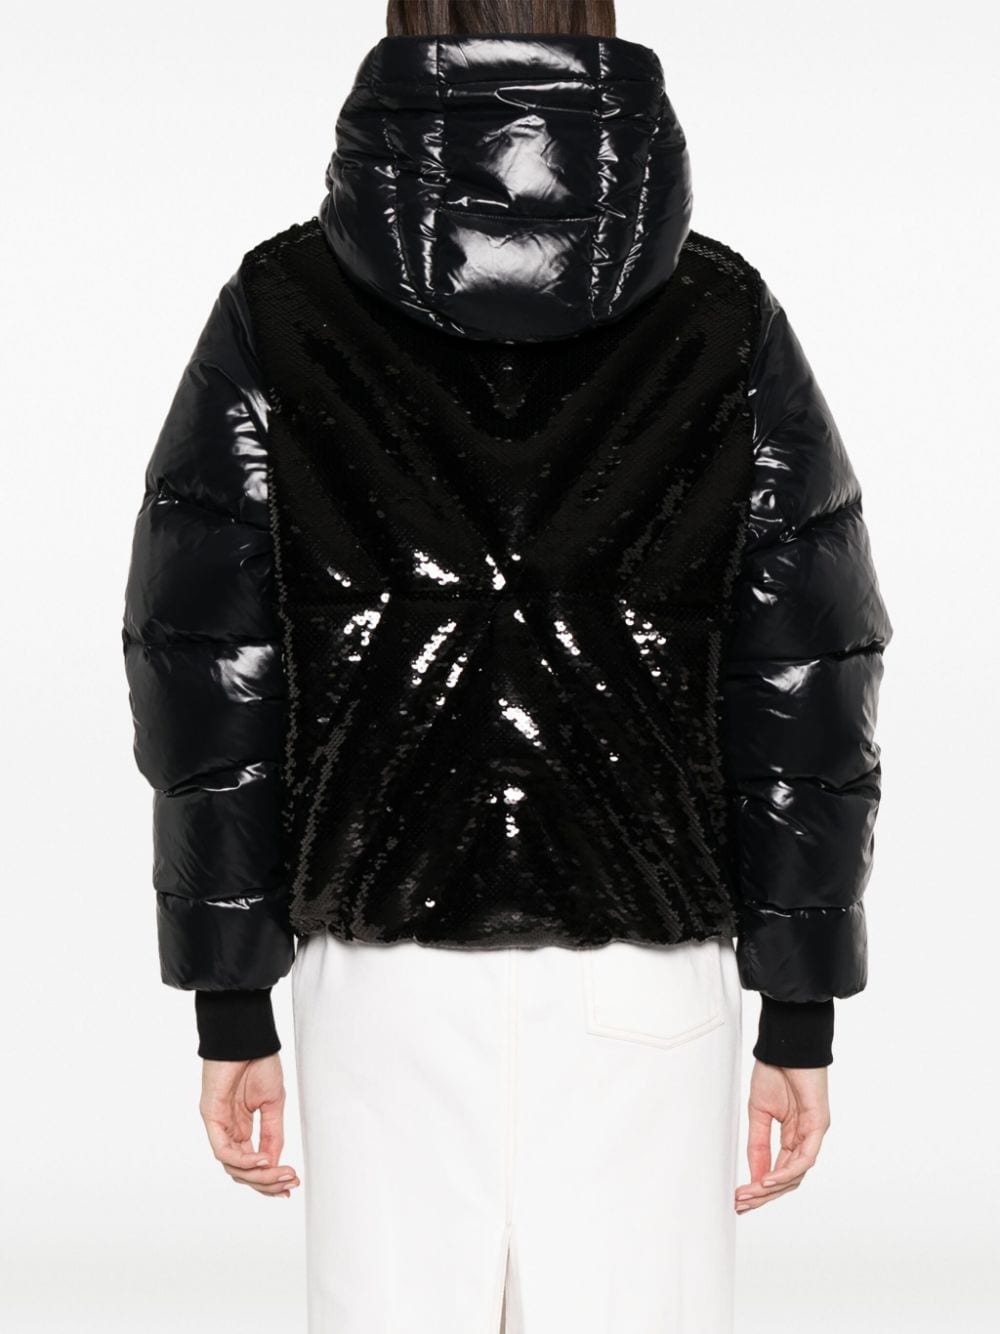 Puff Glossy Sequins hooded jacket - 4